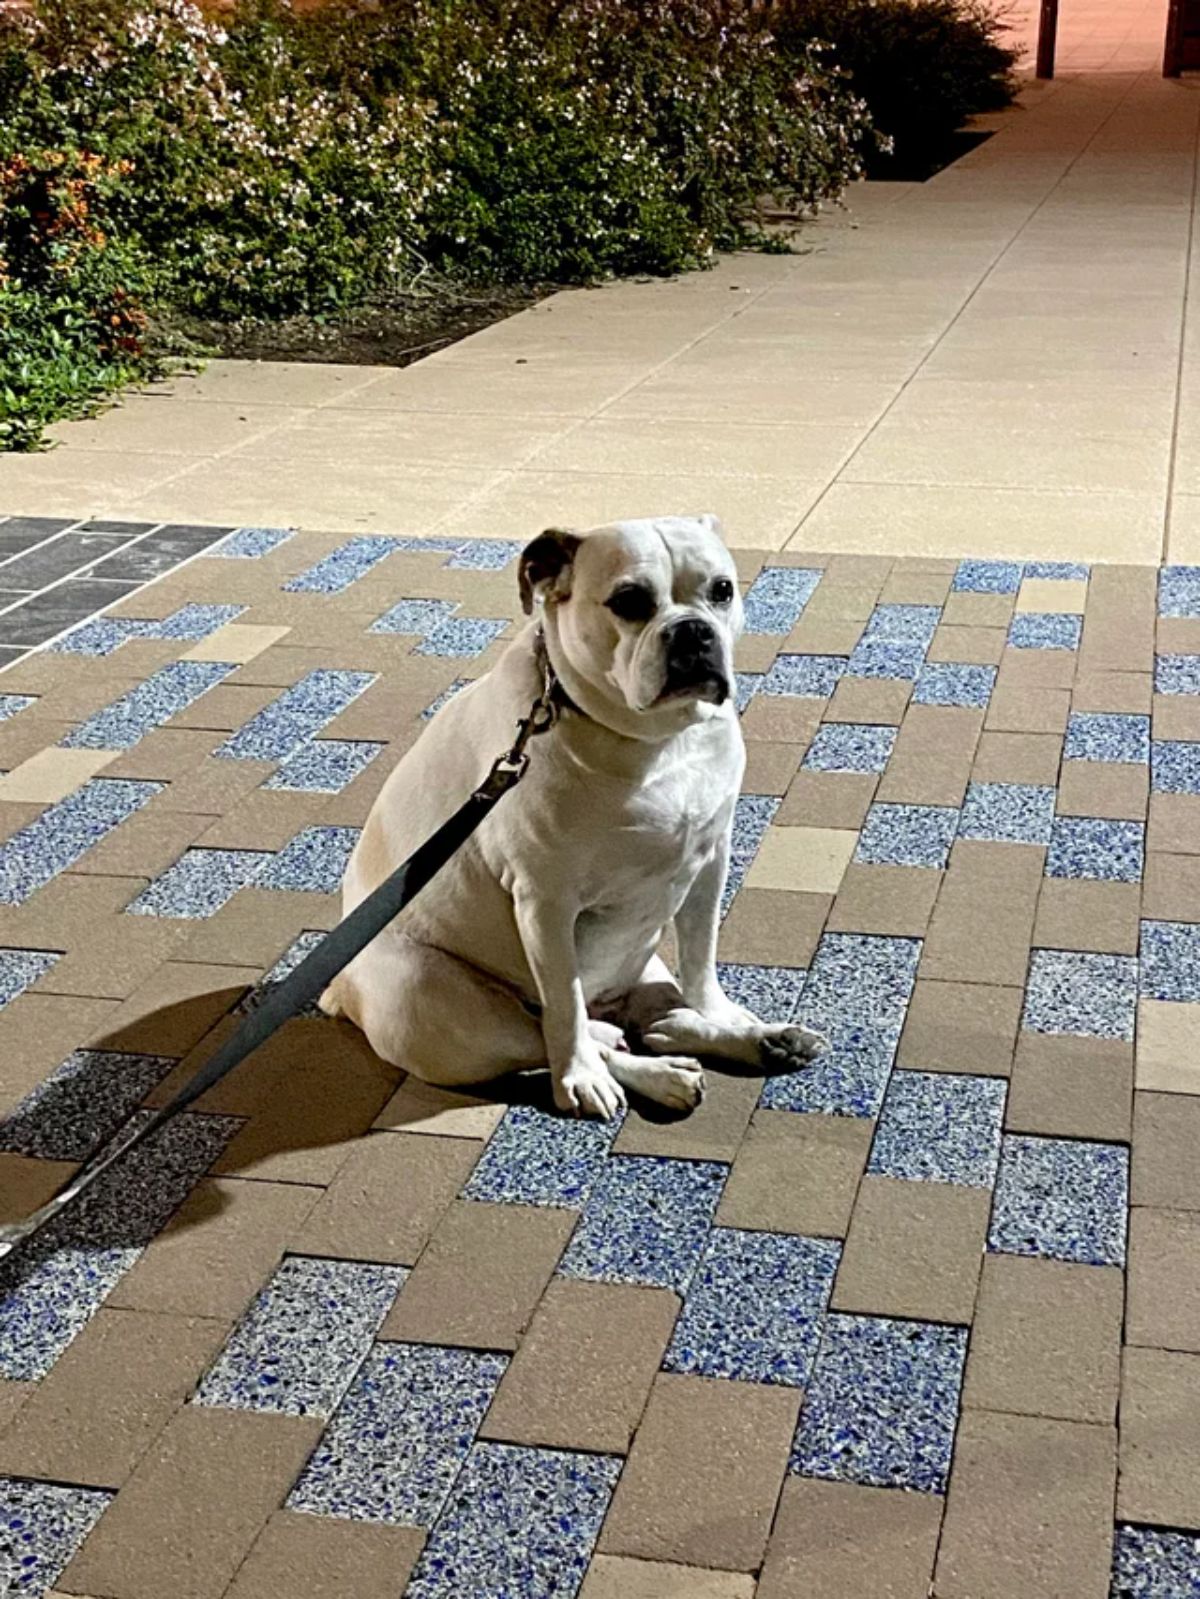 white and brown dog sitting on the tiled floor outside with a black leash looking sad